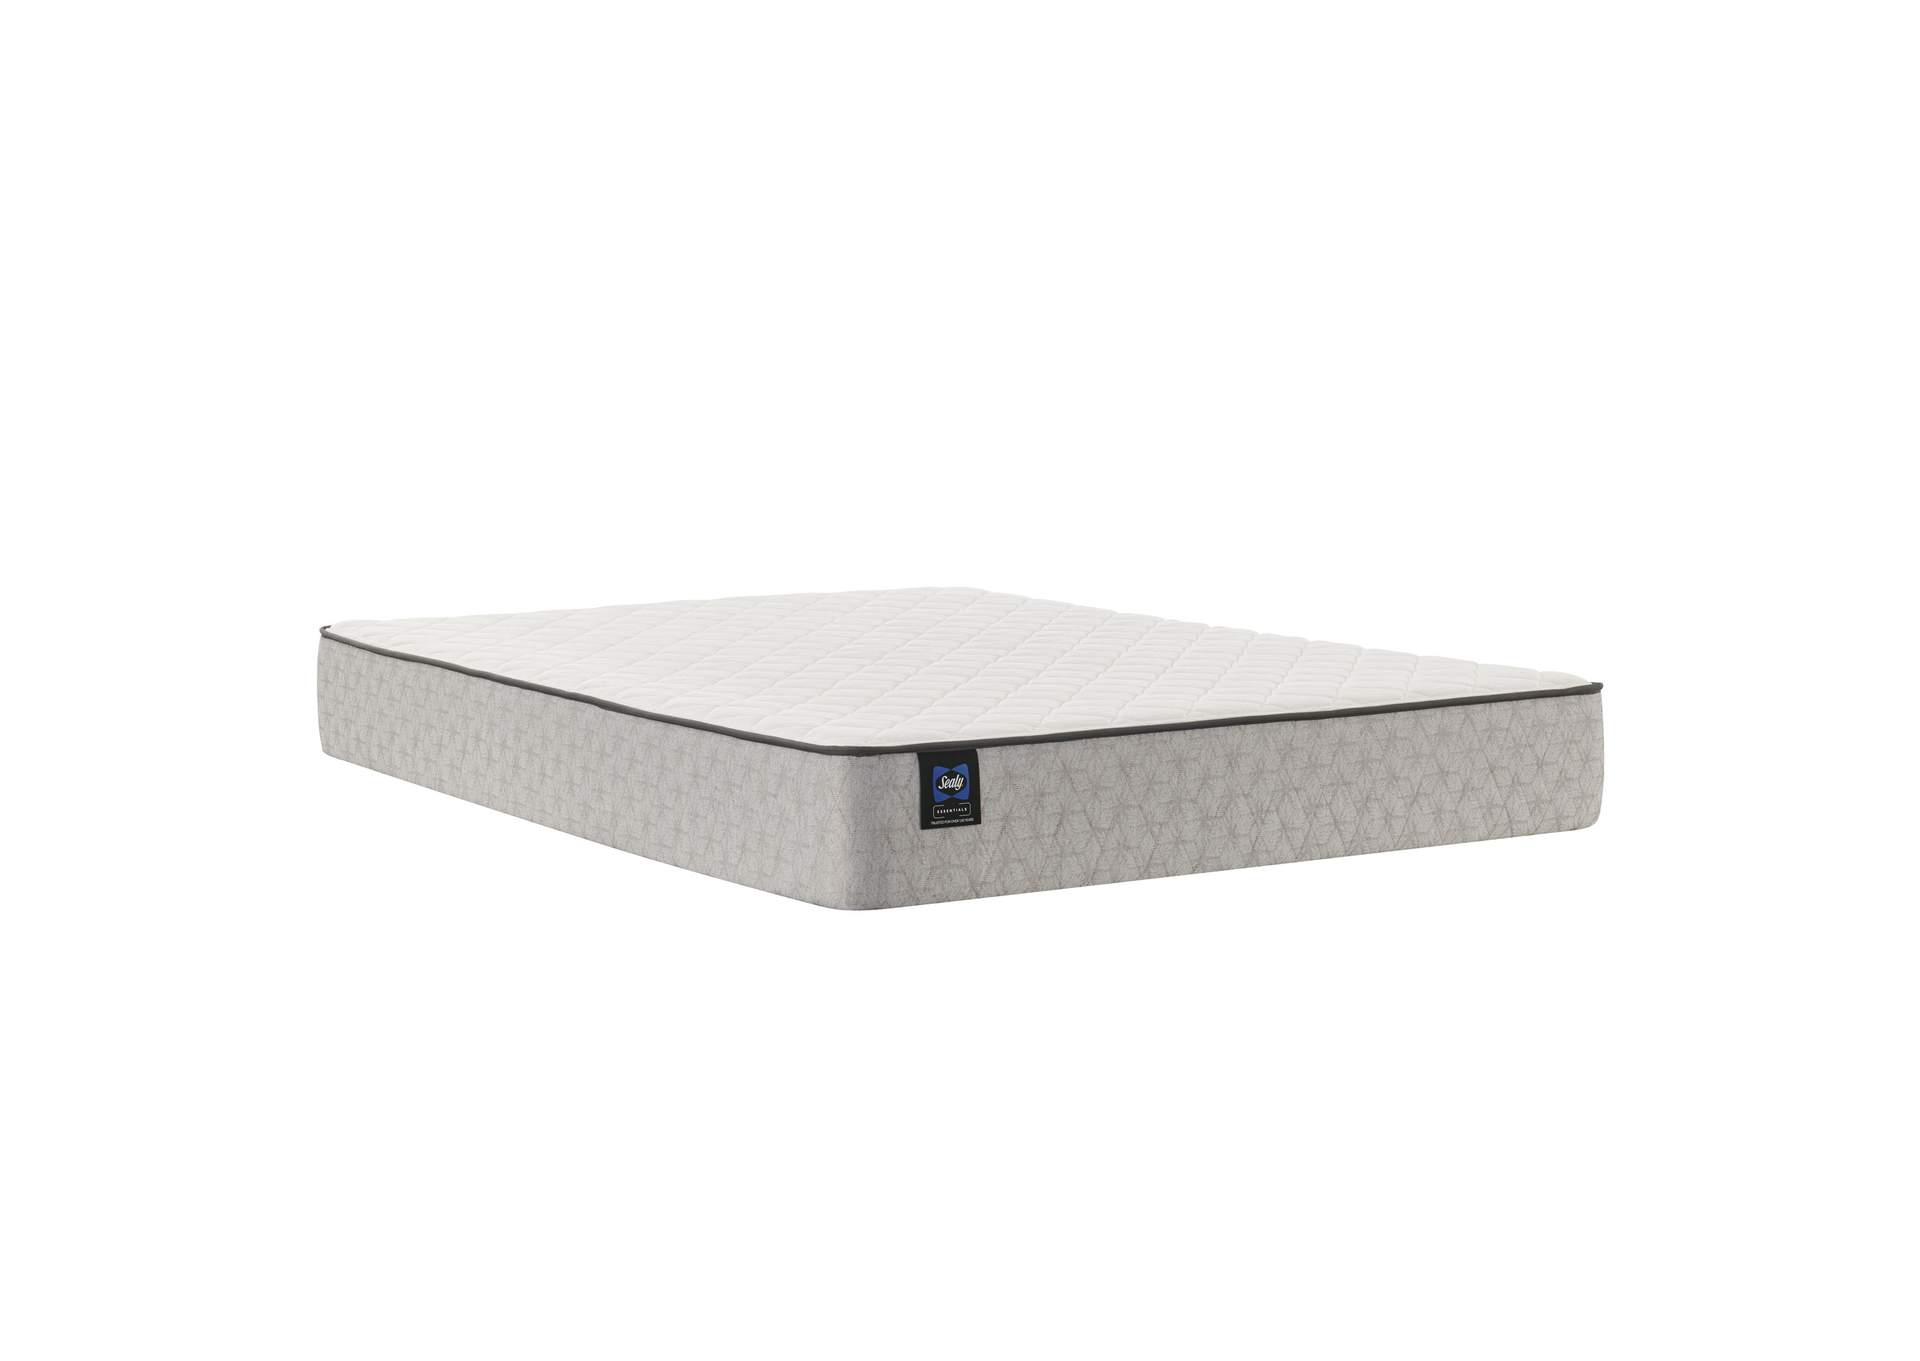 Osage Firm Tight Top Twin XL Mattress,Sealy